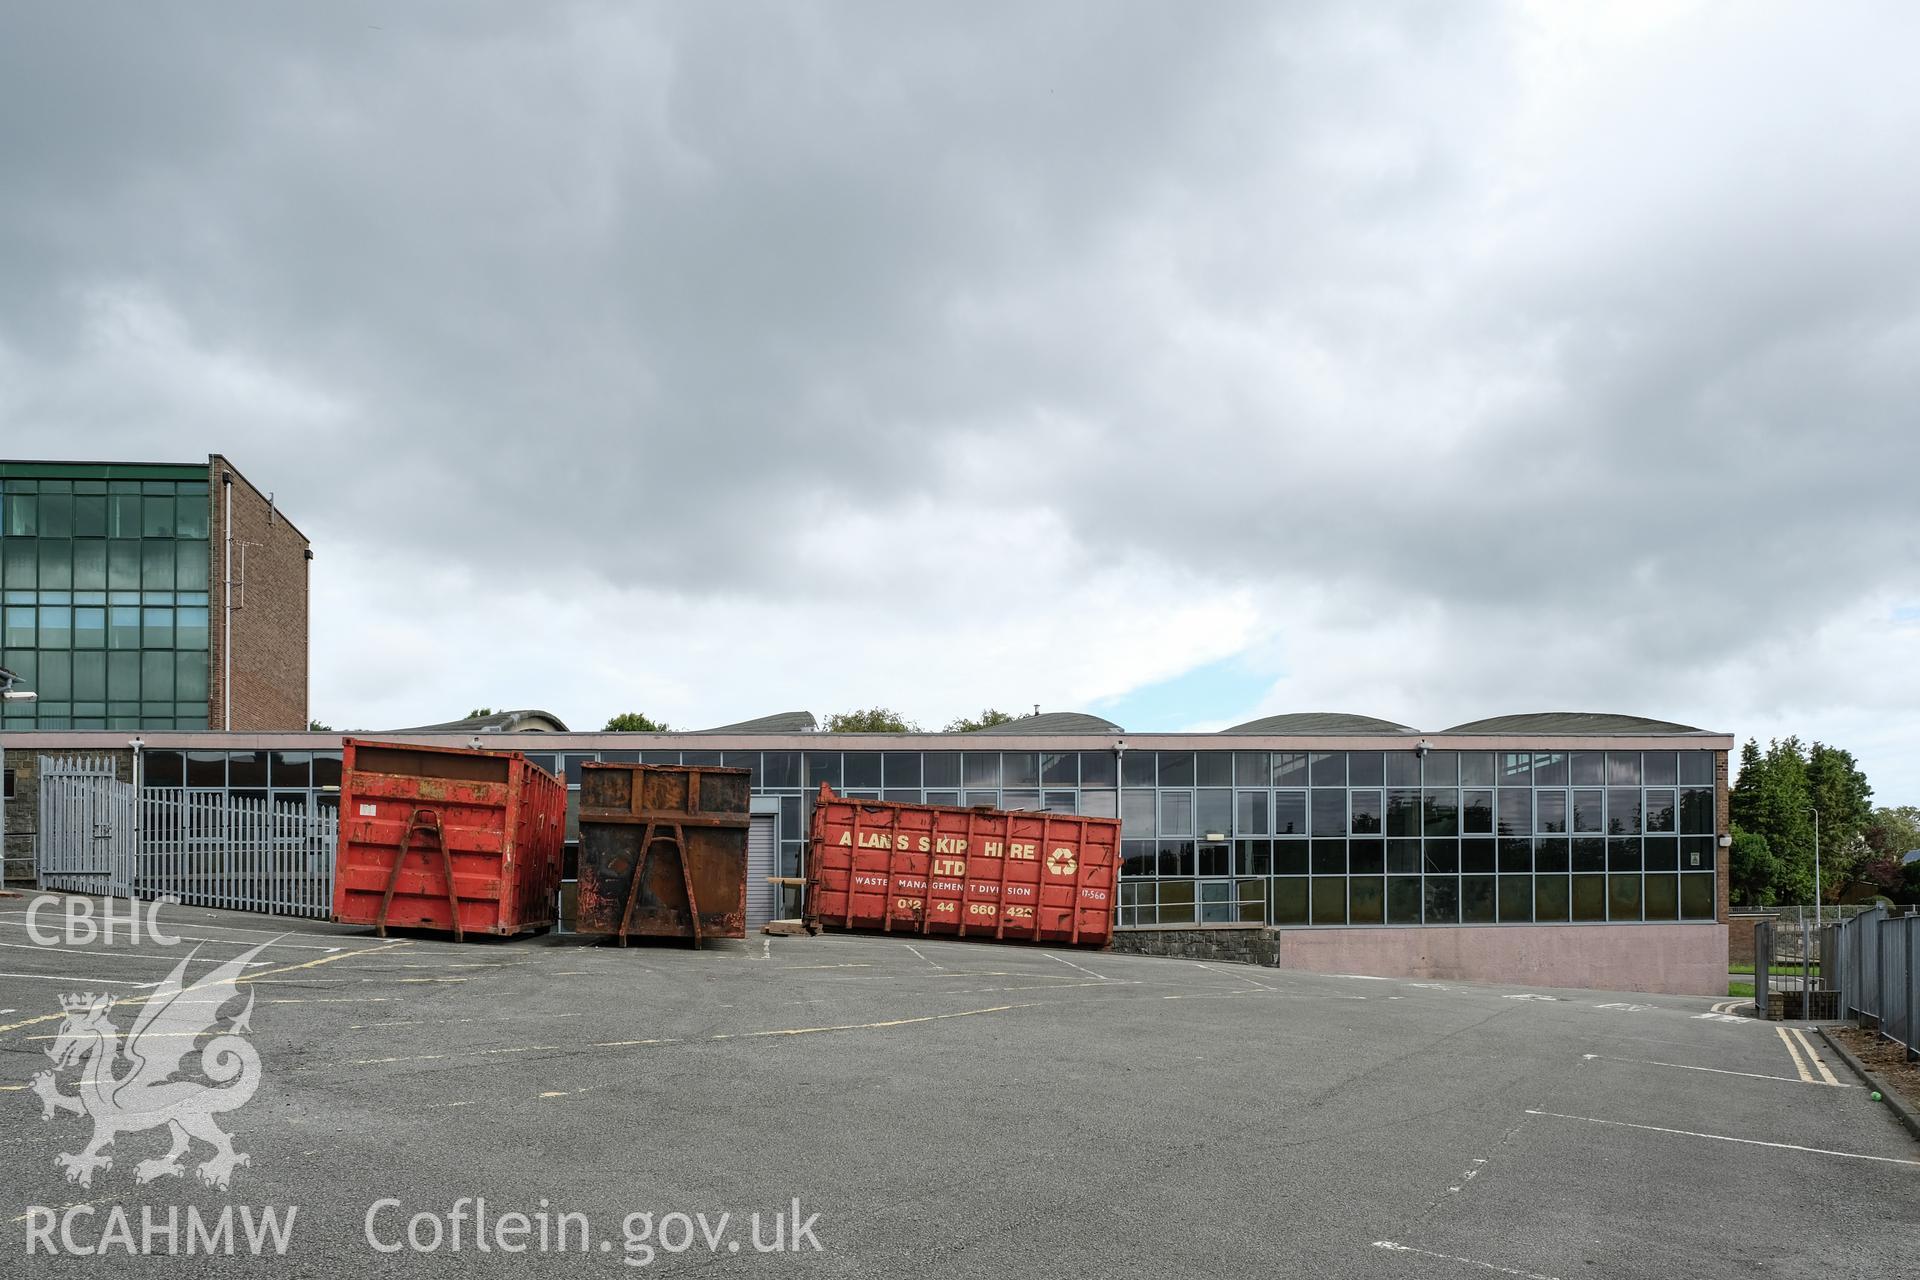 Digital colour photograph of exterior view of a heavily fenestrated wall with skips at Caernarfonshire Technical College, Bangor. Photographed by Dilys Morgan and donated by Wyn Thomas of Grwp Llandrillo-Menai Further Education College, 2019.